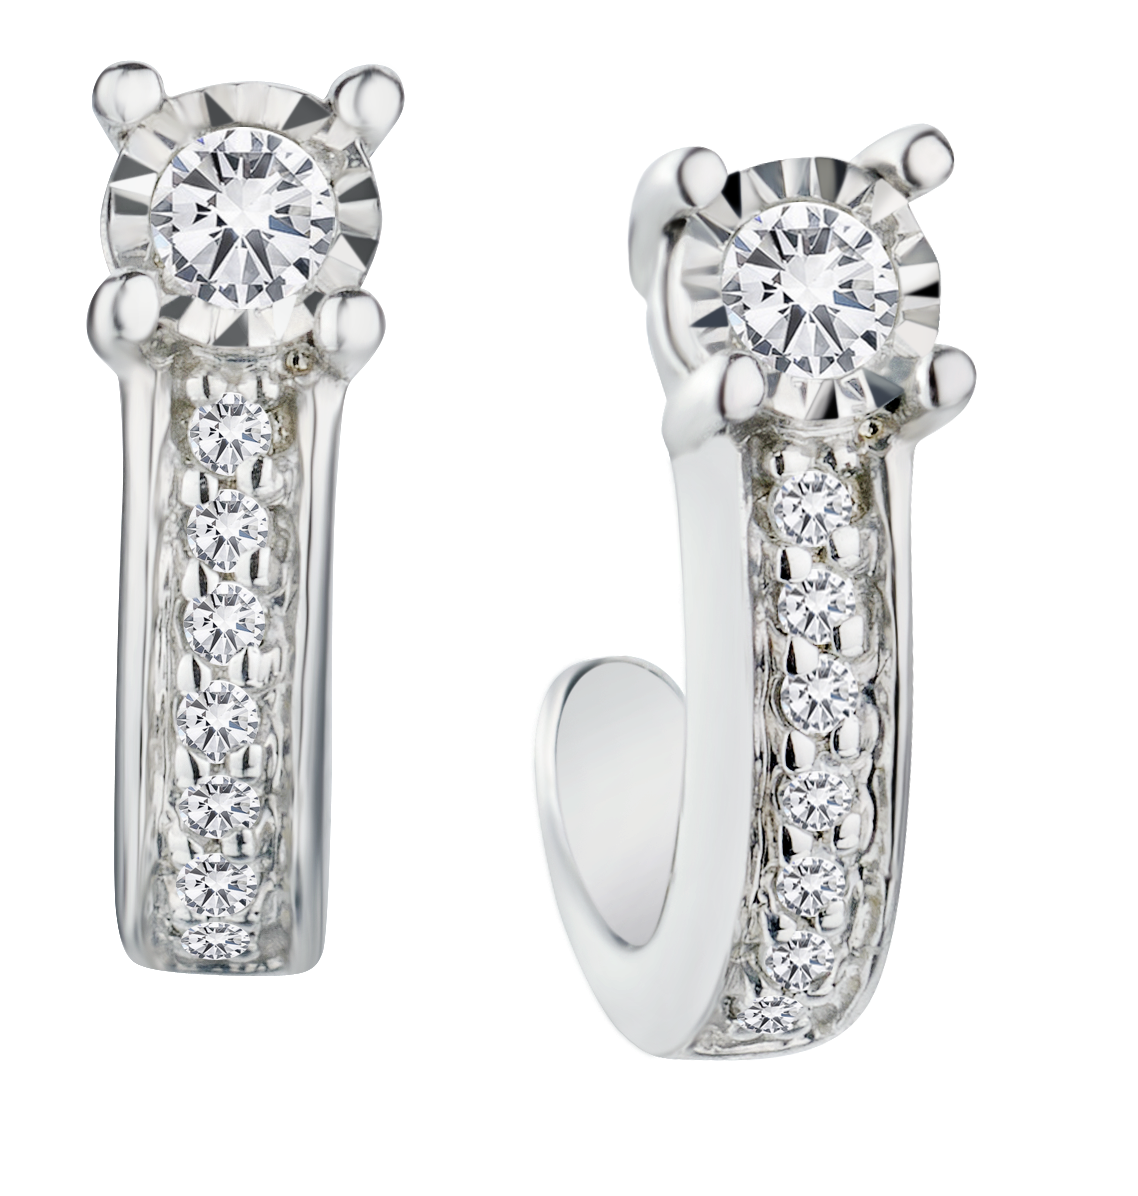 .10 Carat of Diamonds "Miracle" Earrings, 14kt White Gold.....................NOW